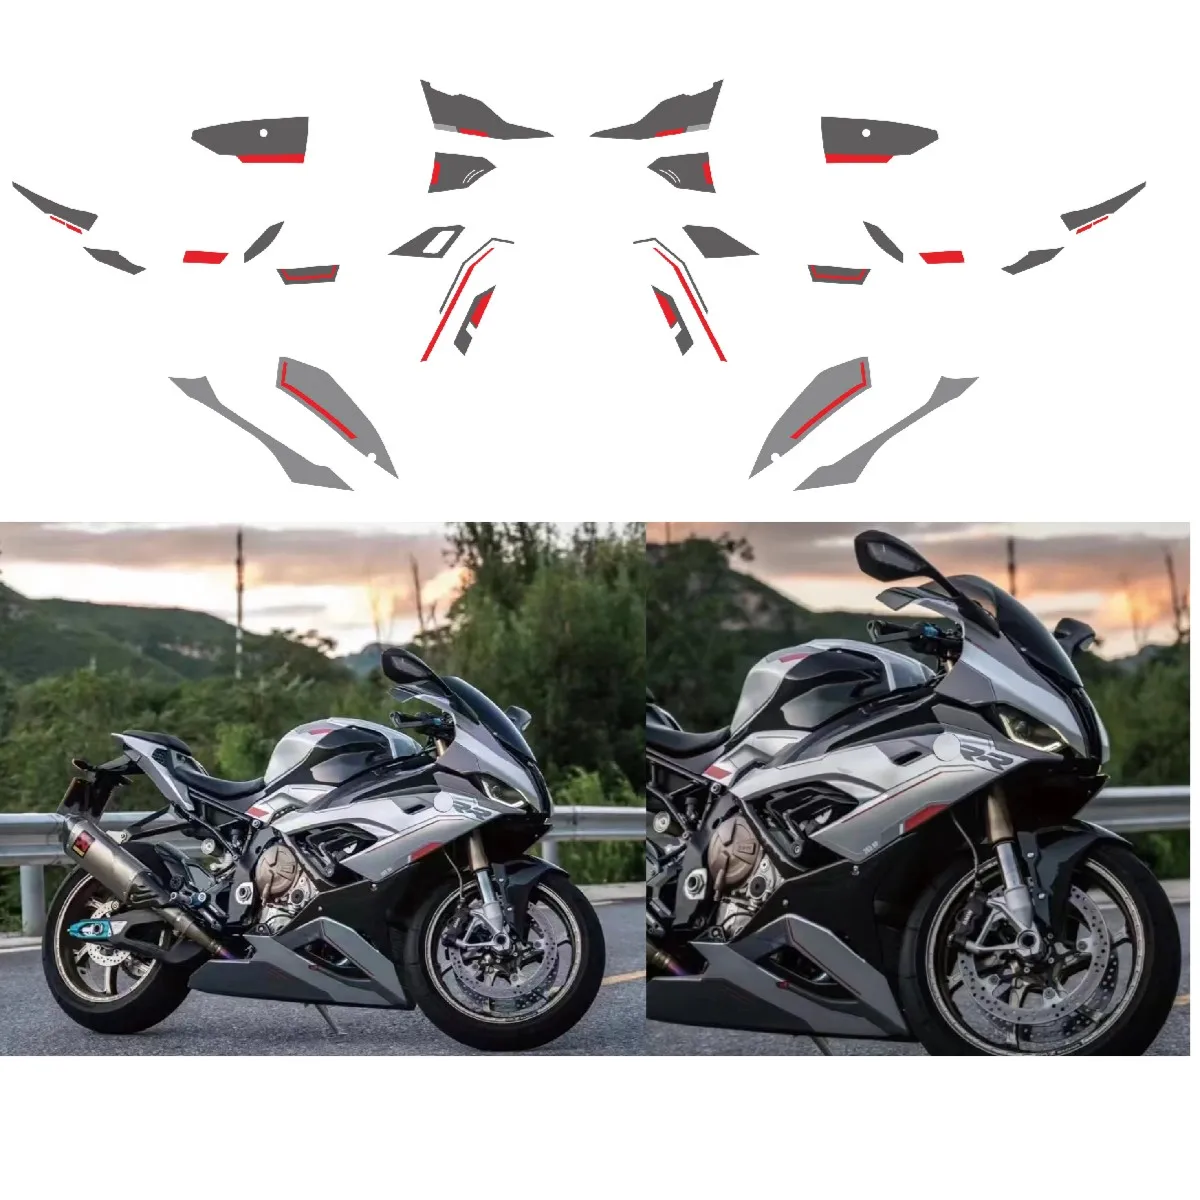 Motorcycle fairing sticker is suitable for M1000RR S1000RR 2019 2020 2021 2022 Auto Expo sticker protection brand logo sticker a860 2070 t371 a860 2070 t321 a860 2020 t361 brand new fanuc encoder